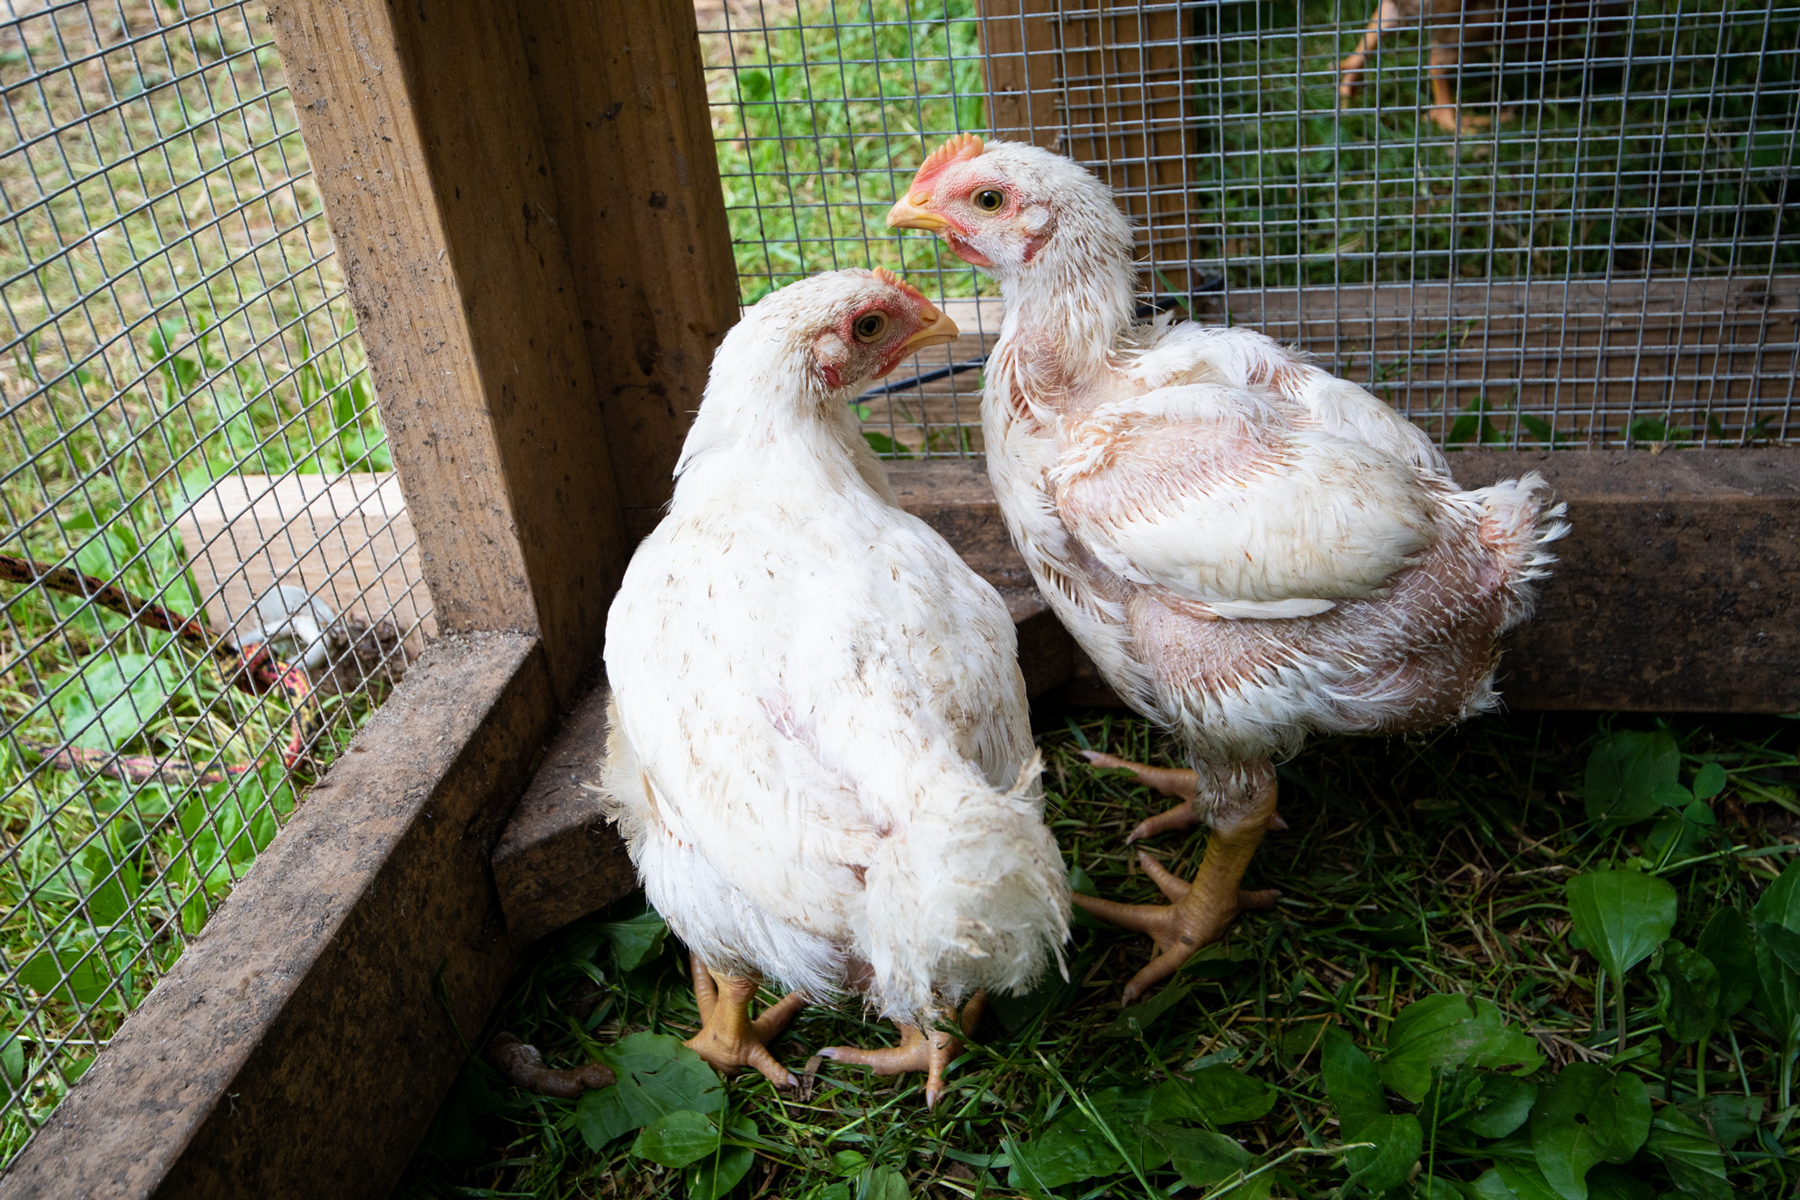 McMurray Hatchery Blog | Amy Fewell | How to Make Money Off Your Chickens | Raising Broiler Chickens for Meat and Sale